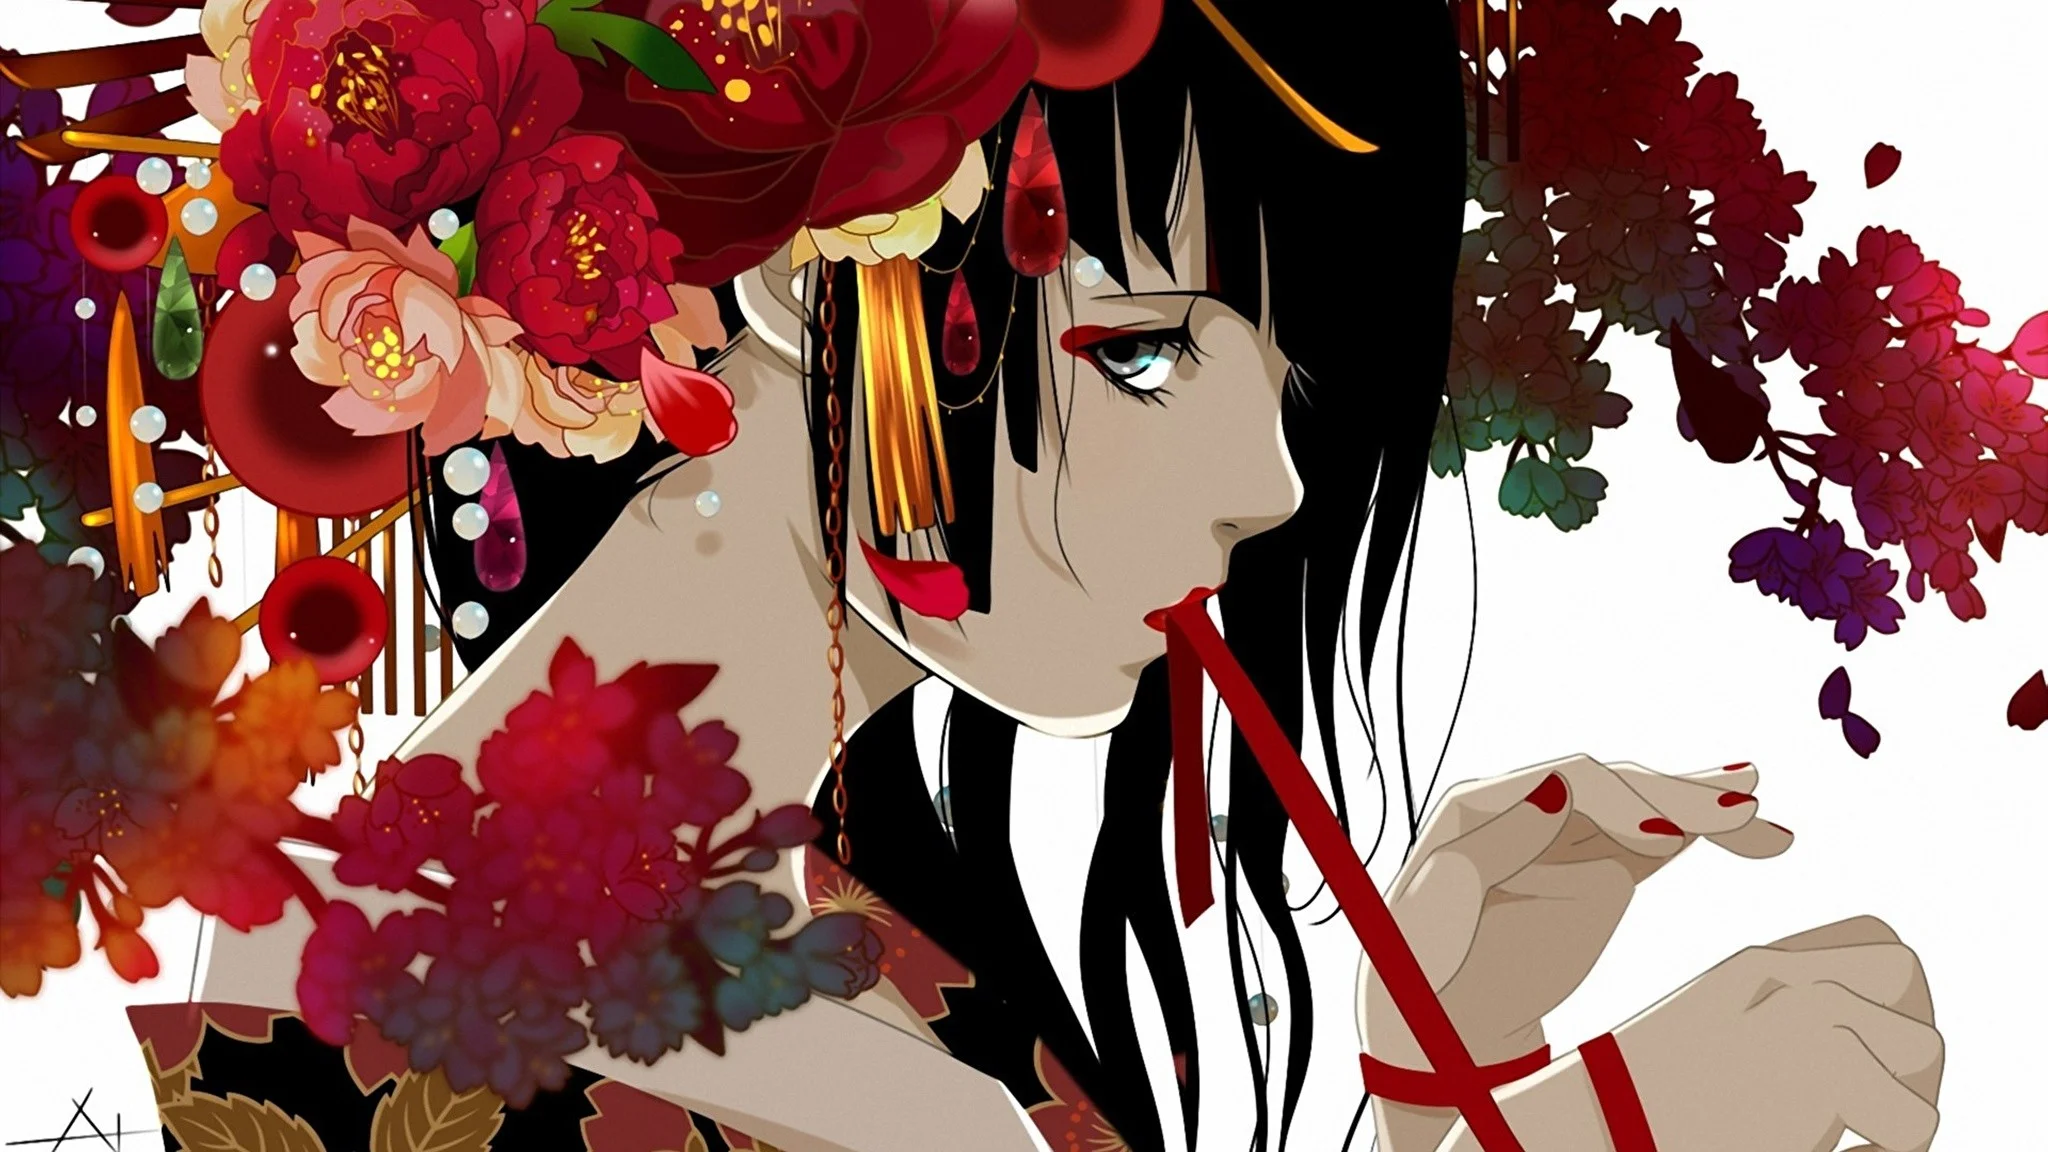 Wallpapers Anime Girls Flowers Painting Art 2048×1152